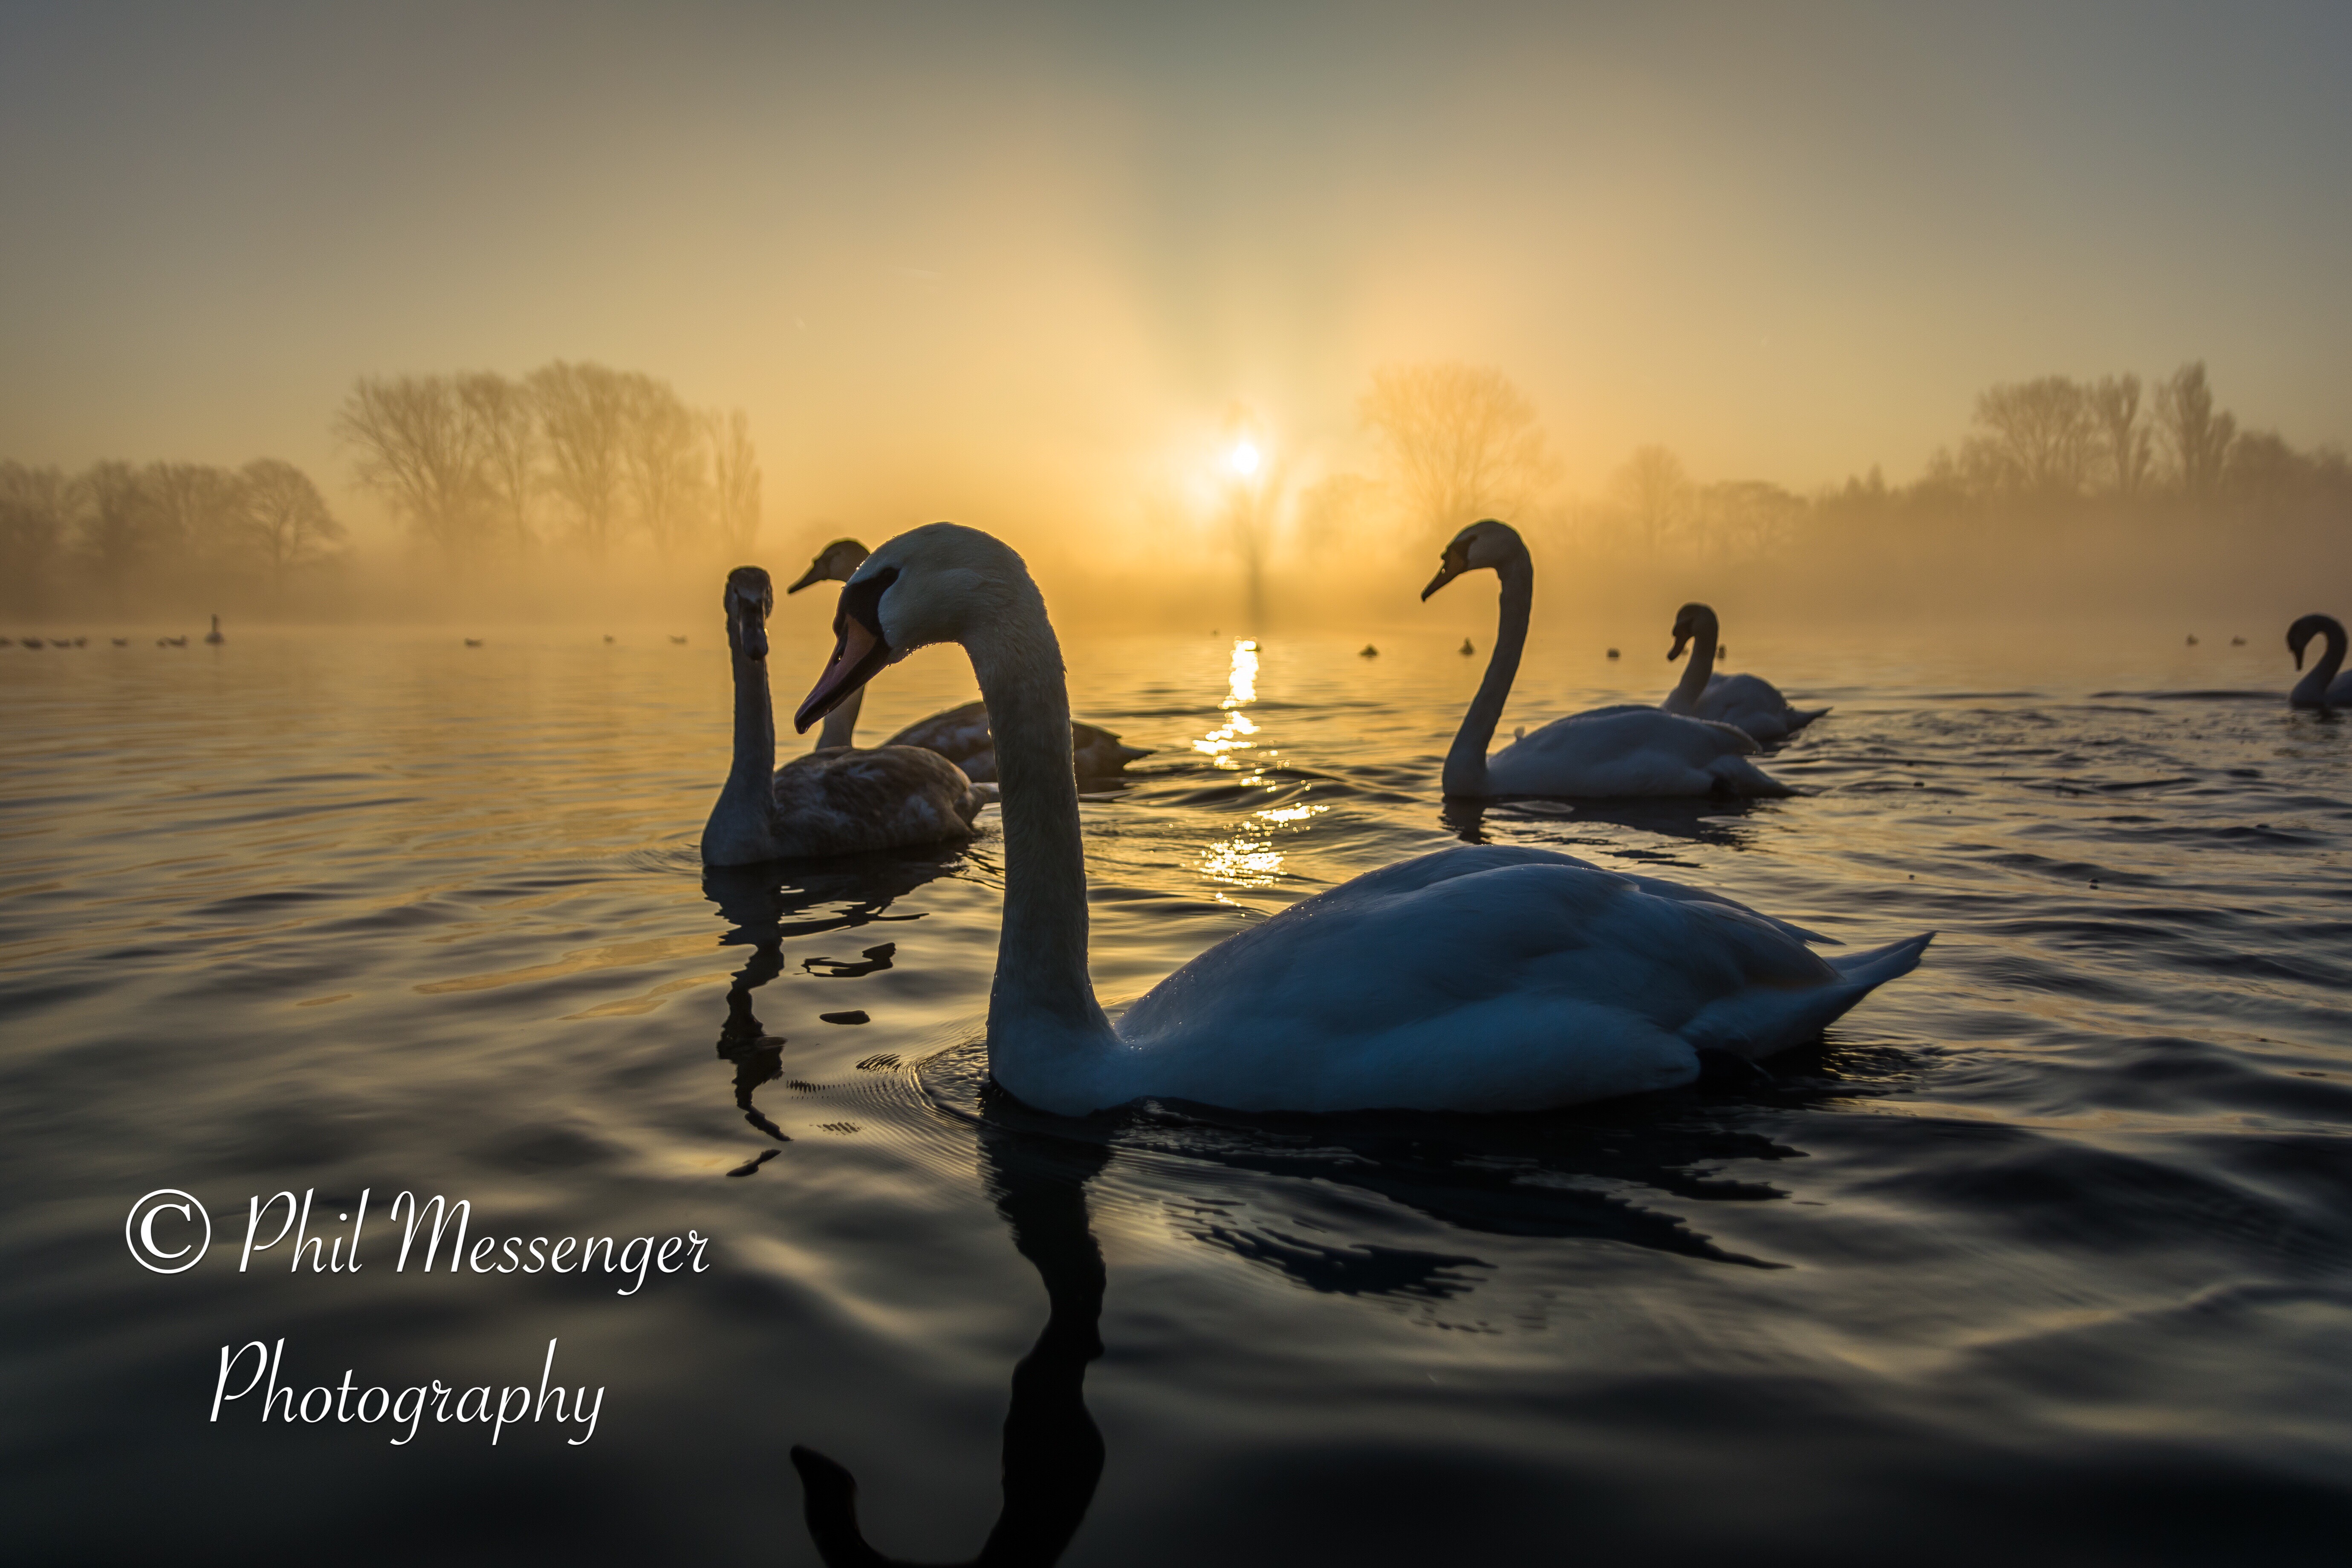 Eye to eye with swans at sunrise.